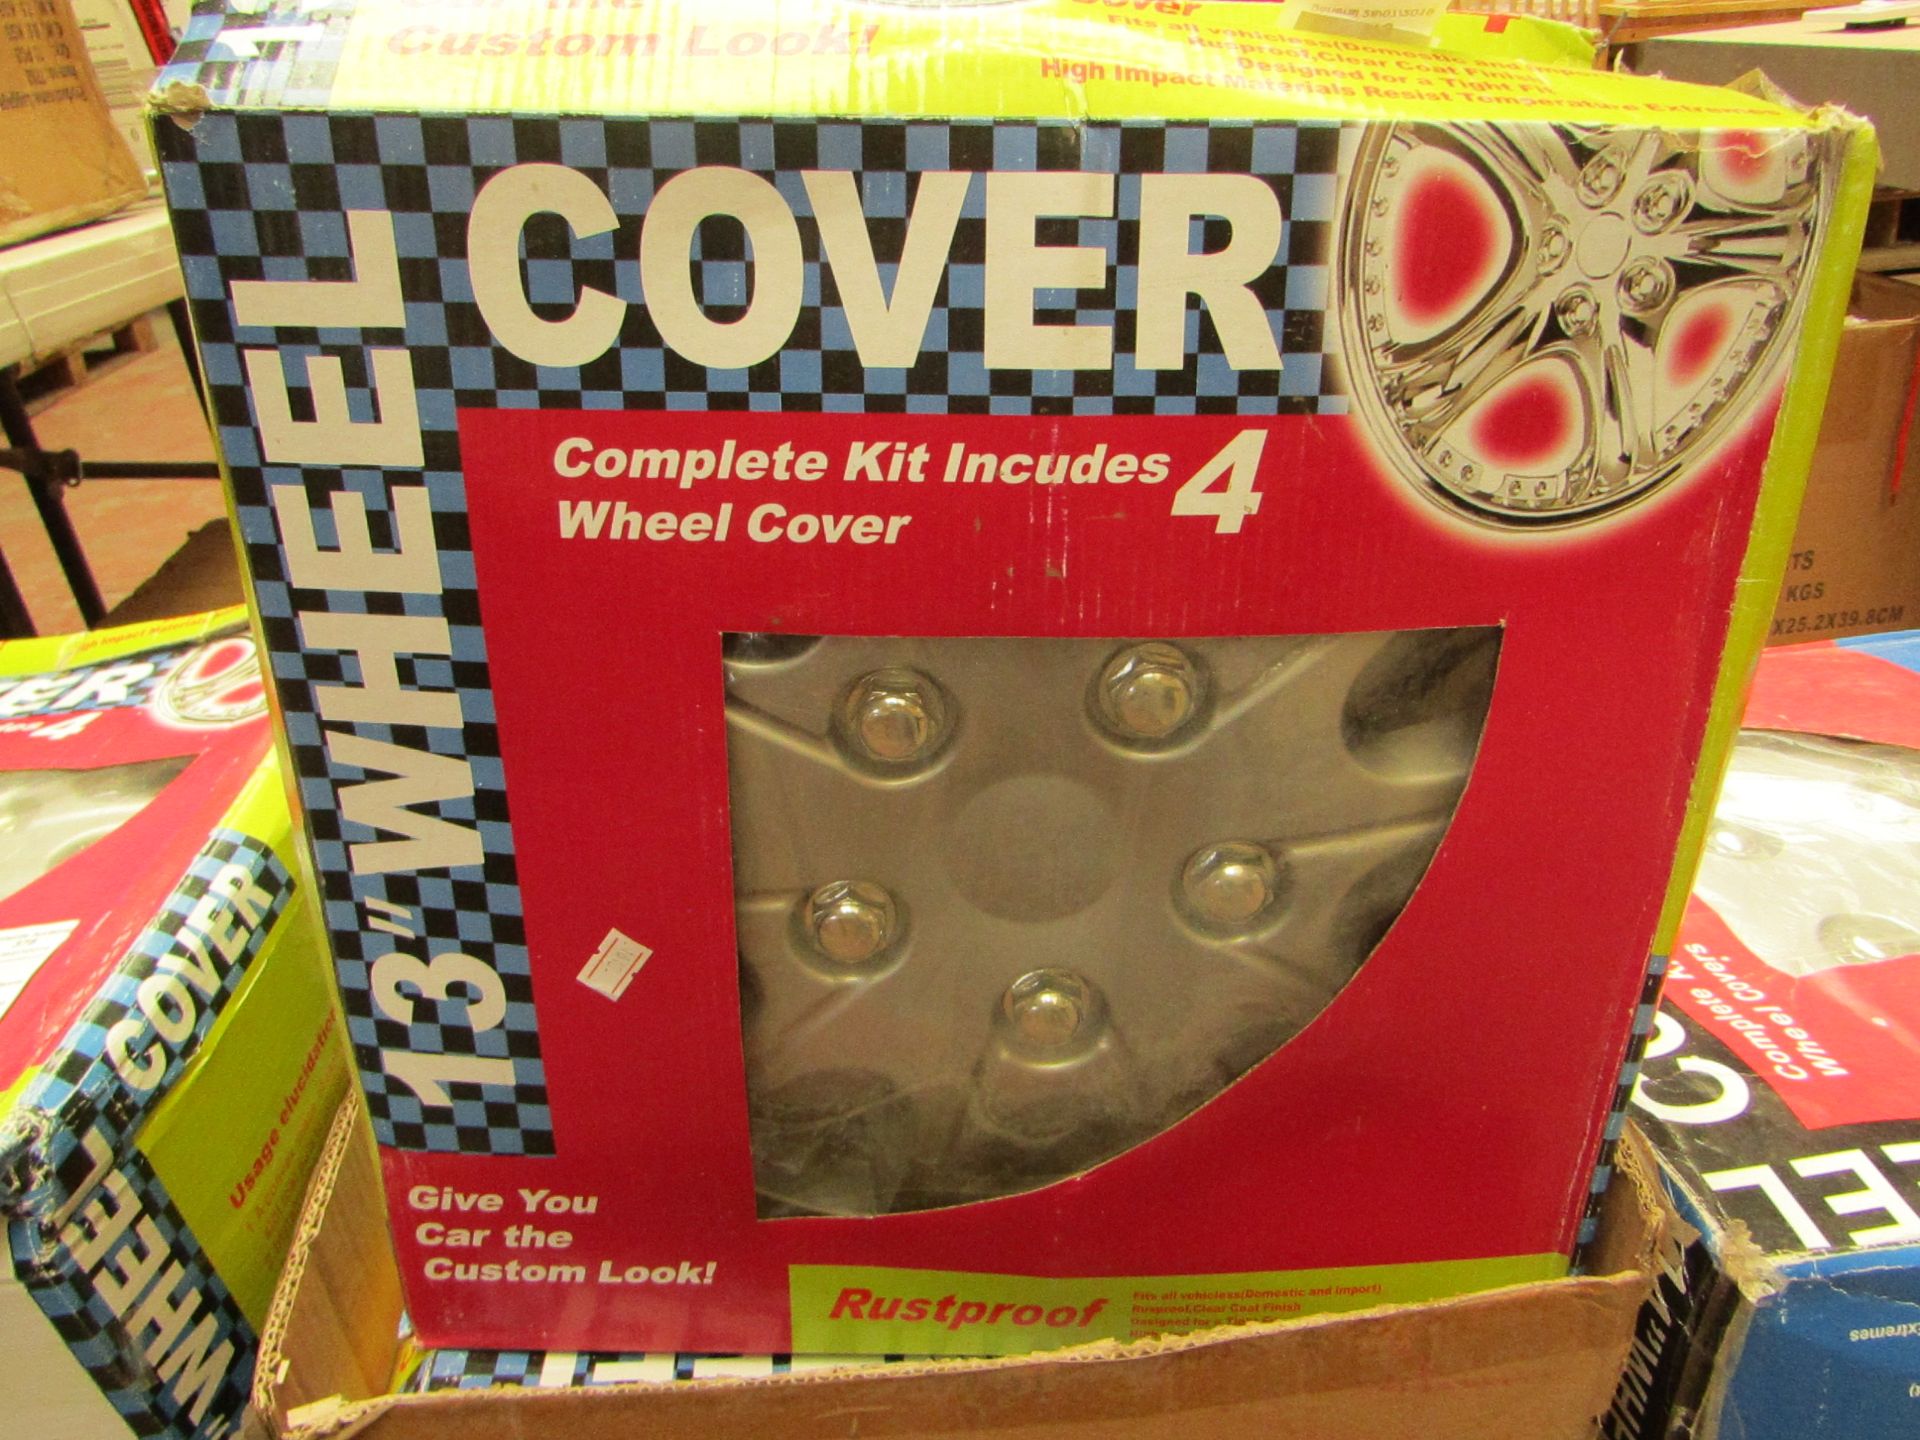 Set of 4 13" wheel covers, new and boxed.